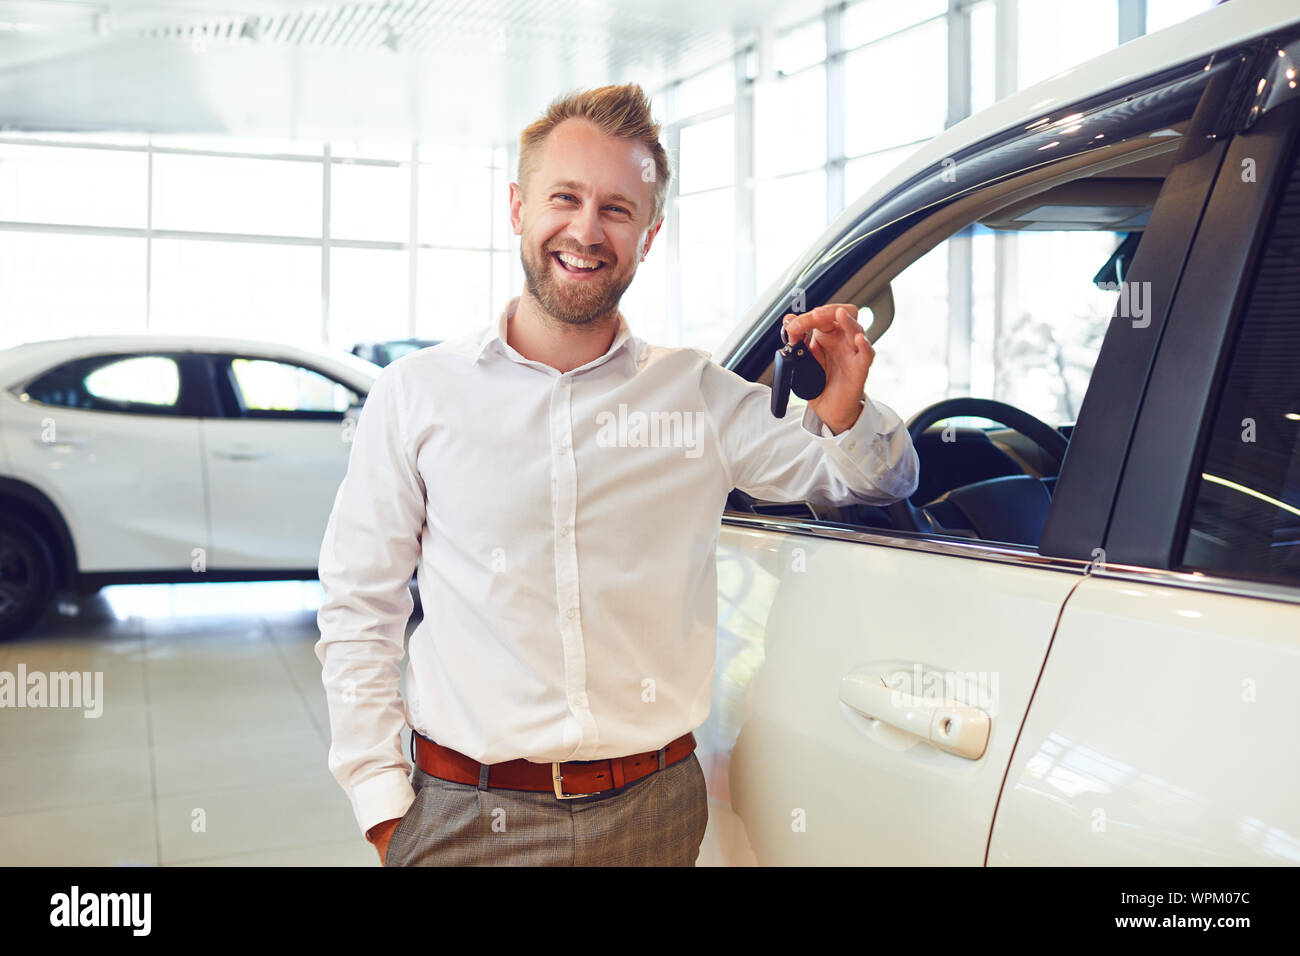 Happy buyer of a new car holds keys Stock Photo